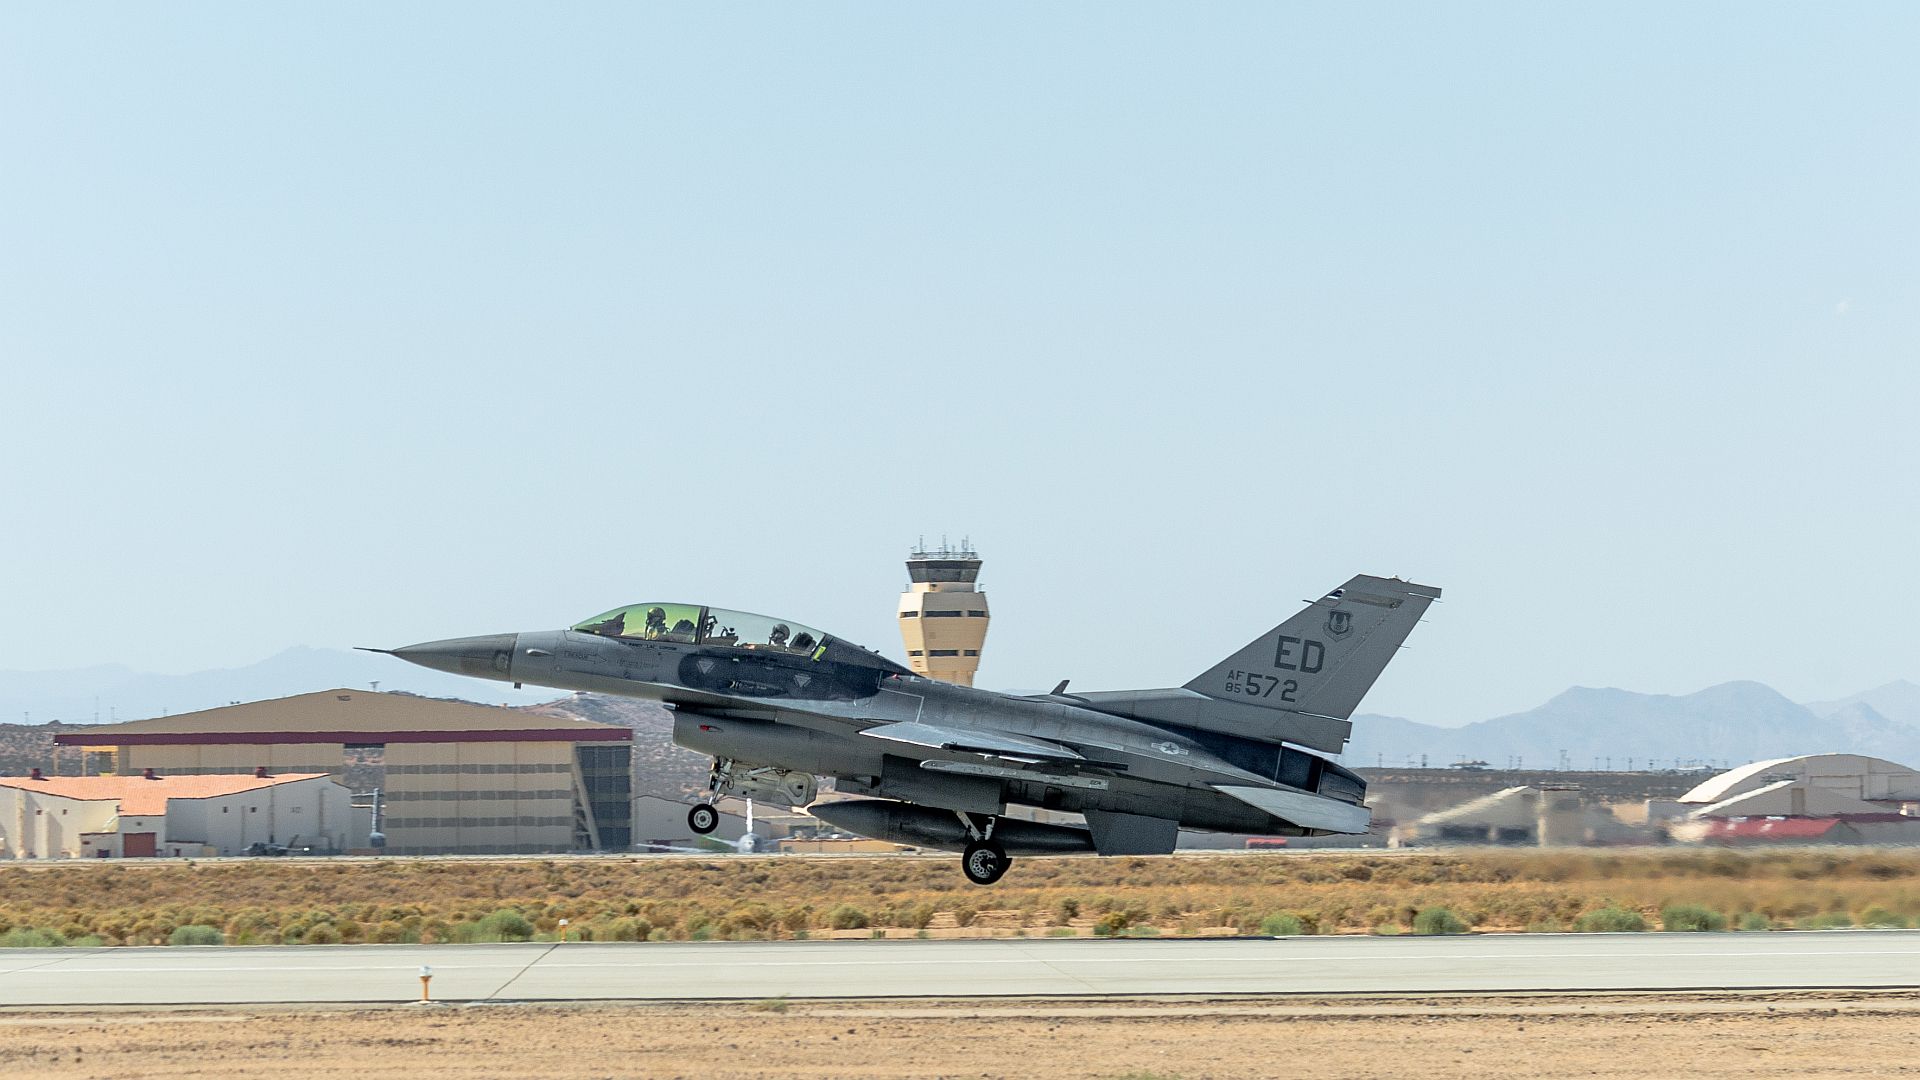 16 Fighting Falcon From The 416th Flight Test Squadron 412th Test Wing Takes Off From Edwards Air Force Base California